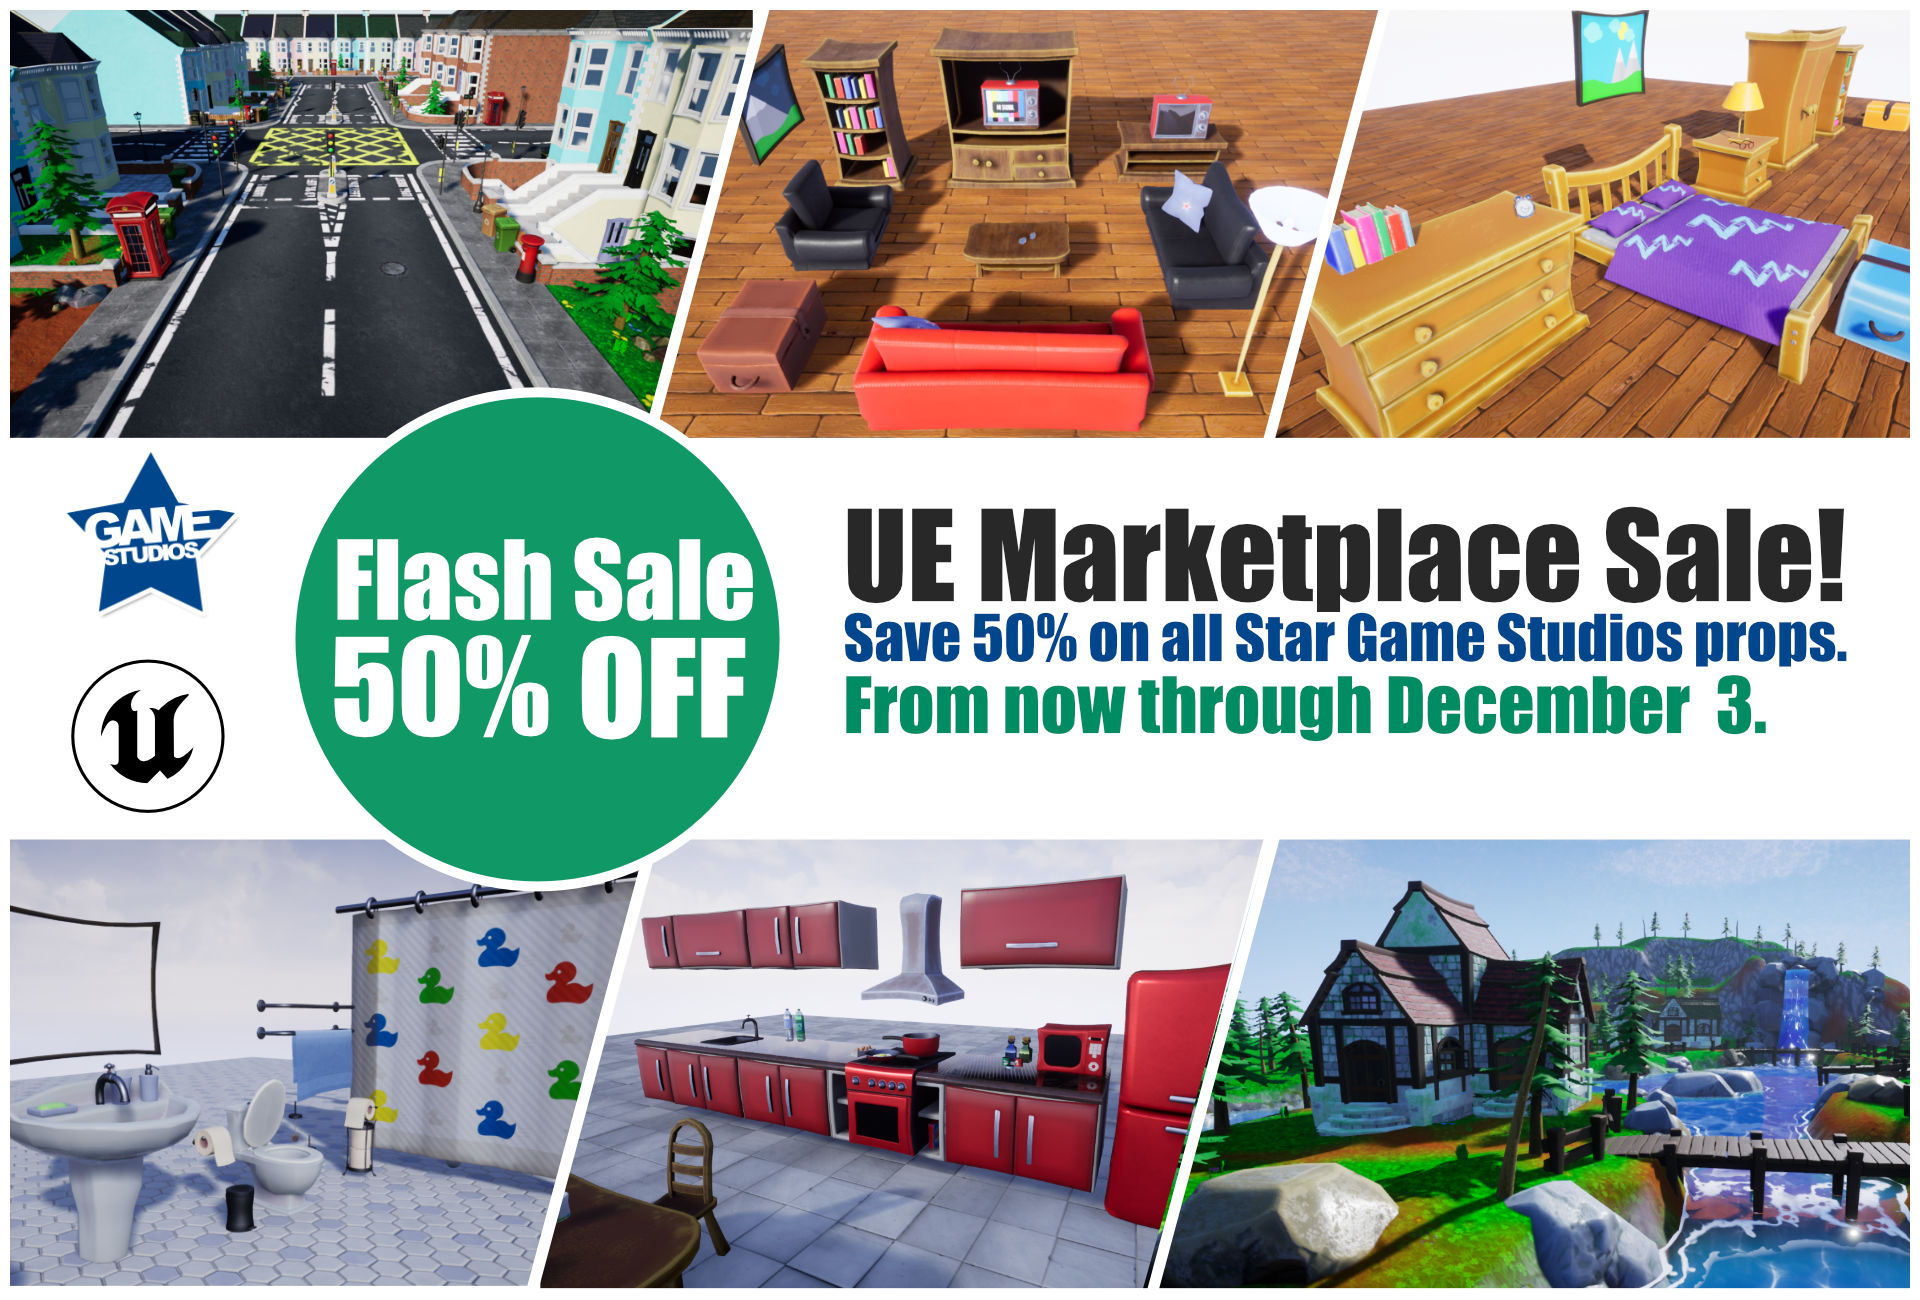 The November Sale is here! Save 50% on all Star Game Studios props now through December 3.